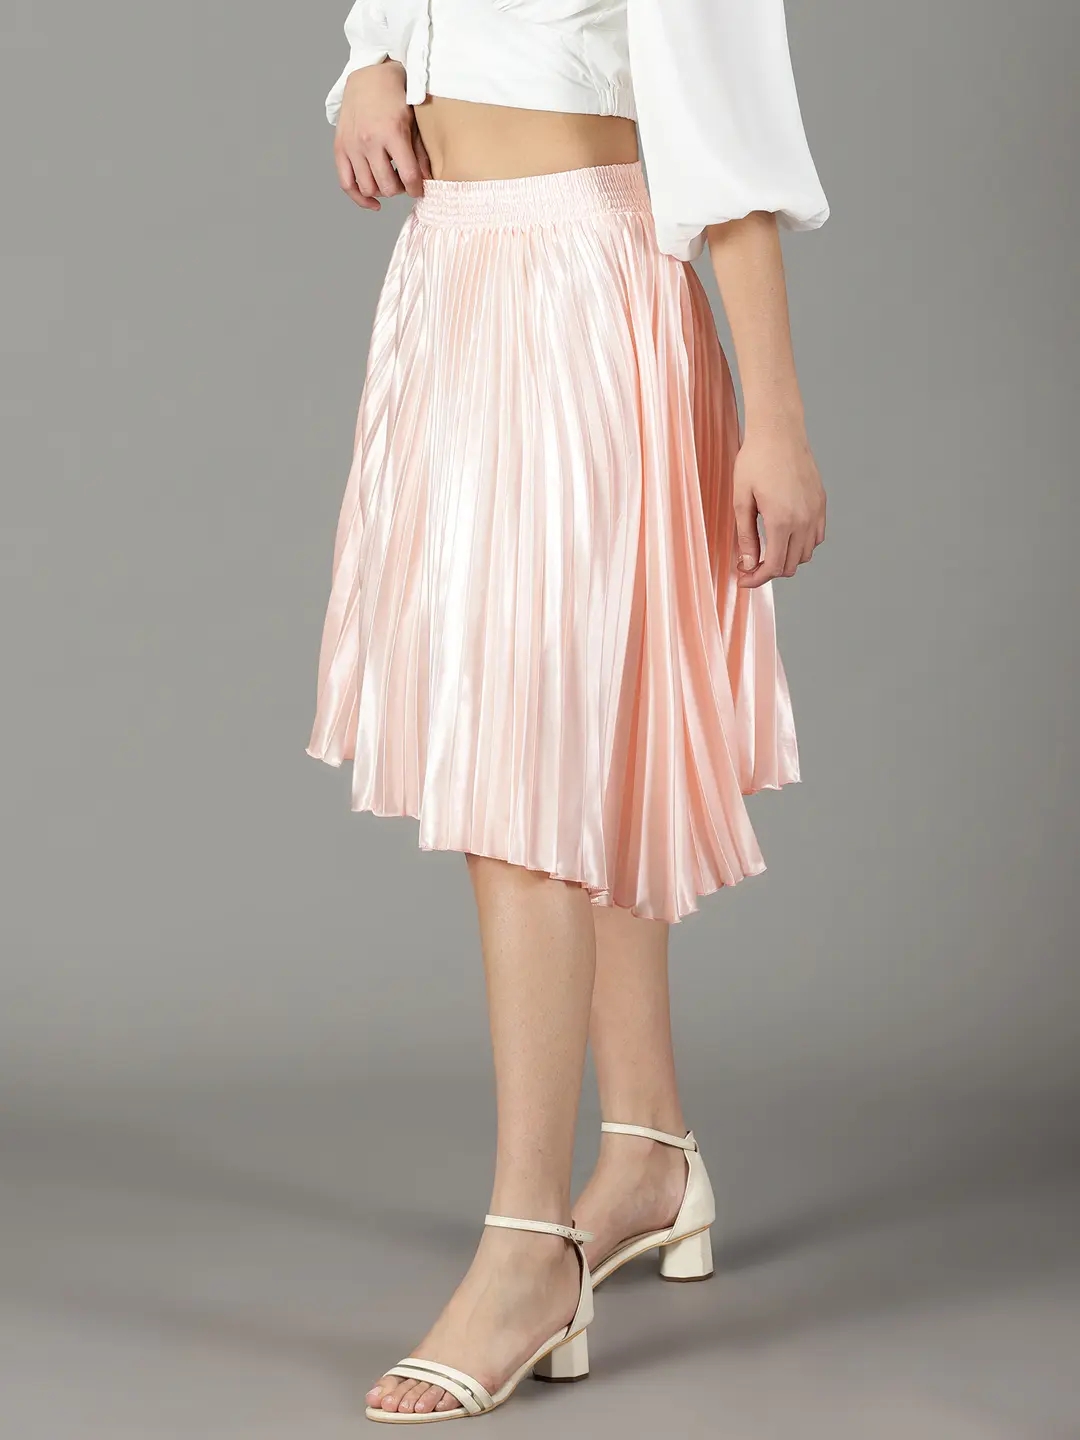 SHOWOFF Women's Solid Peach Satin Flared Skirt